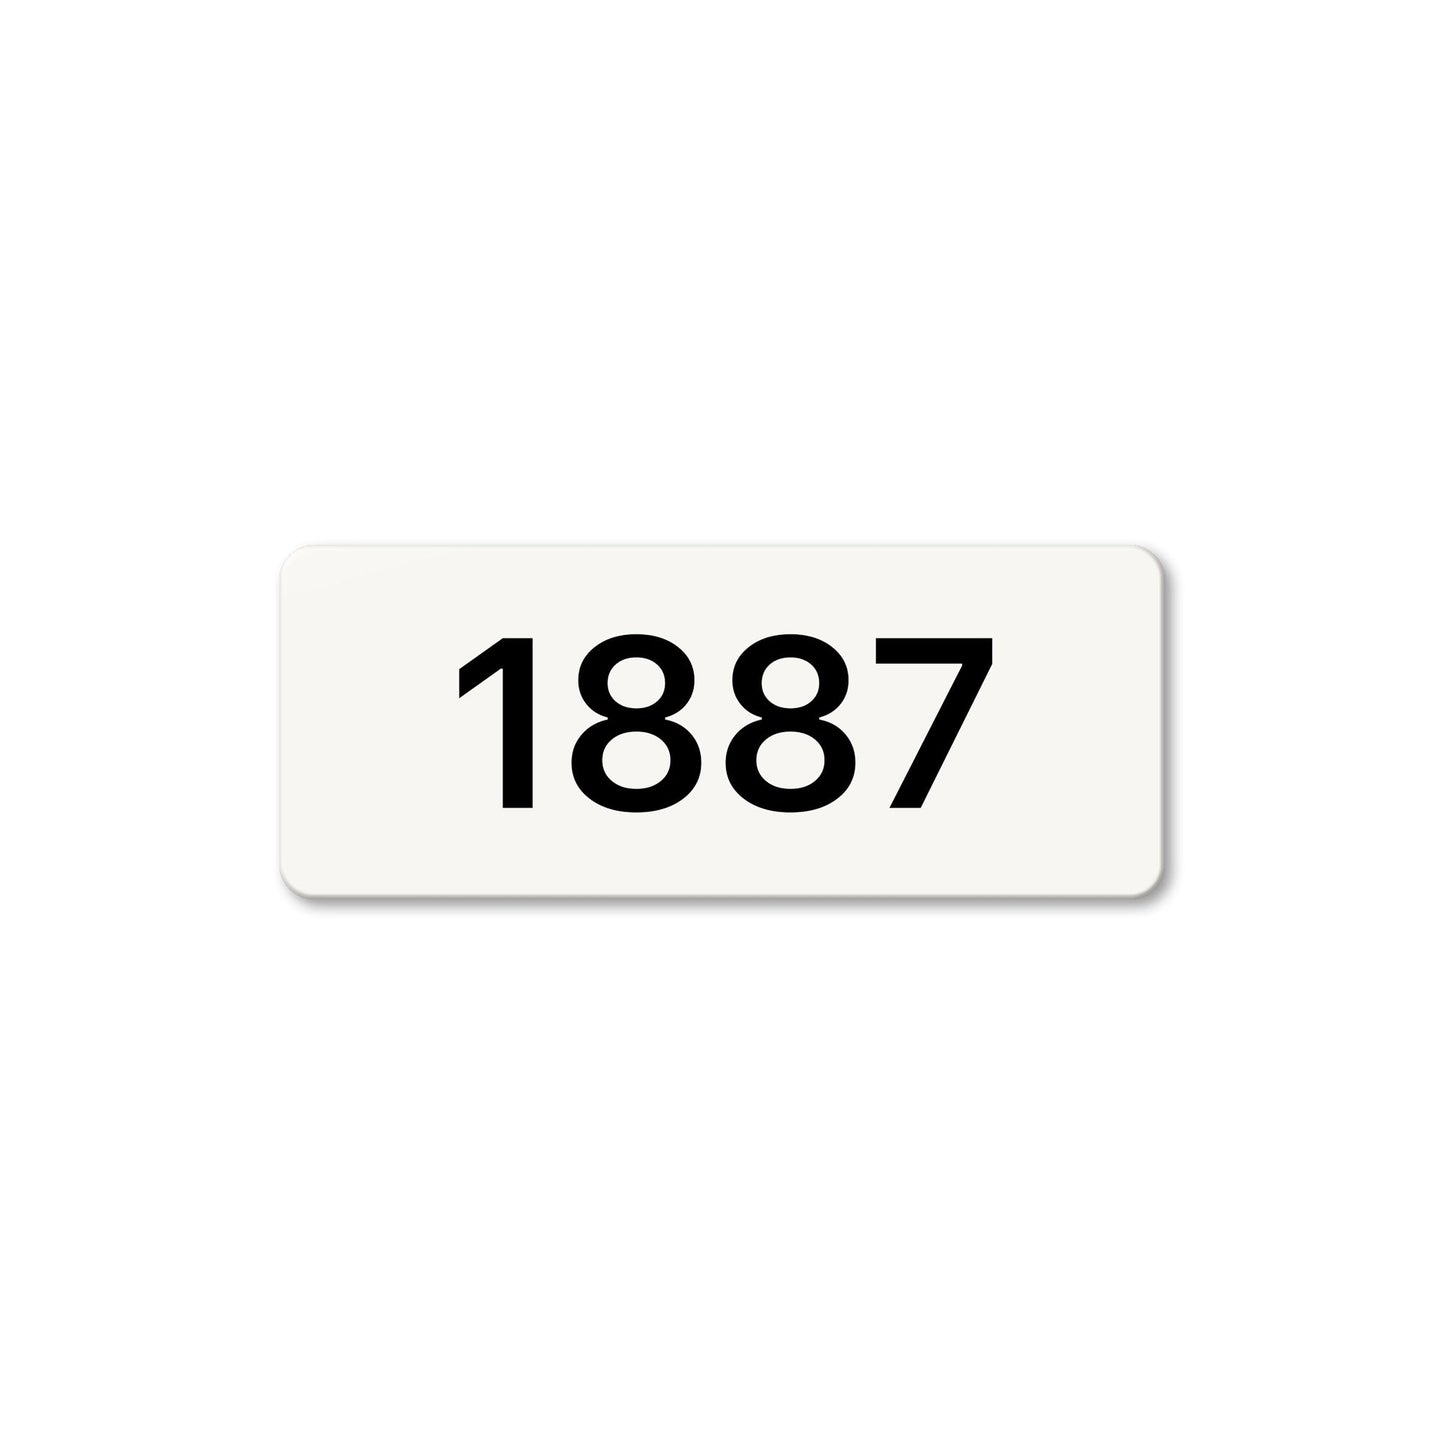 Numeral 1887